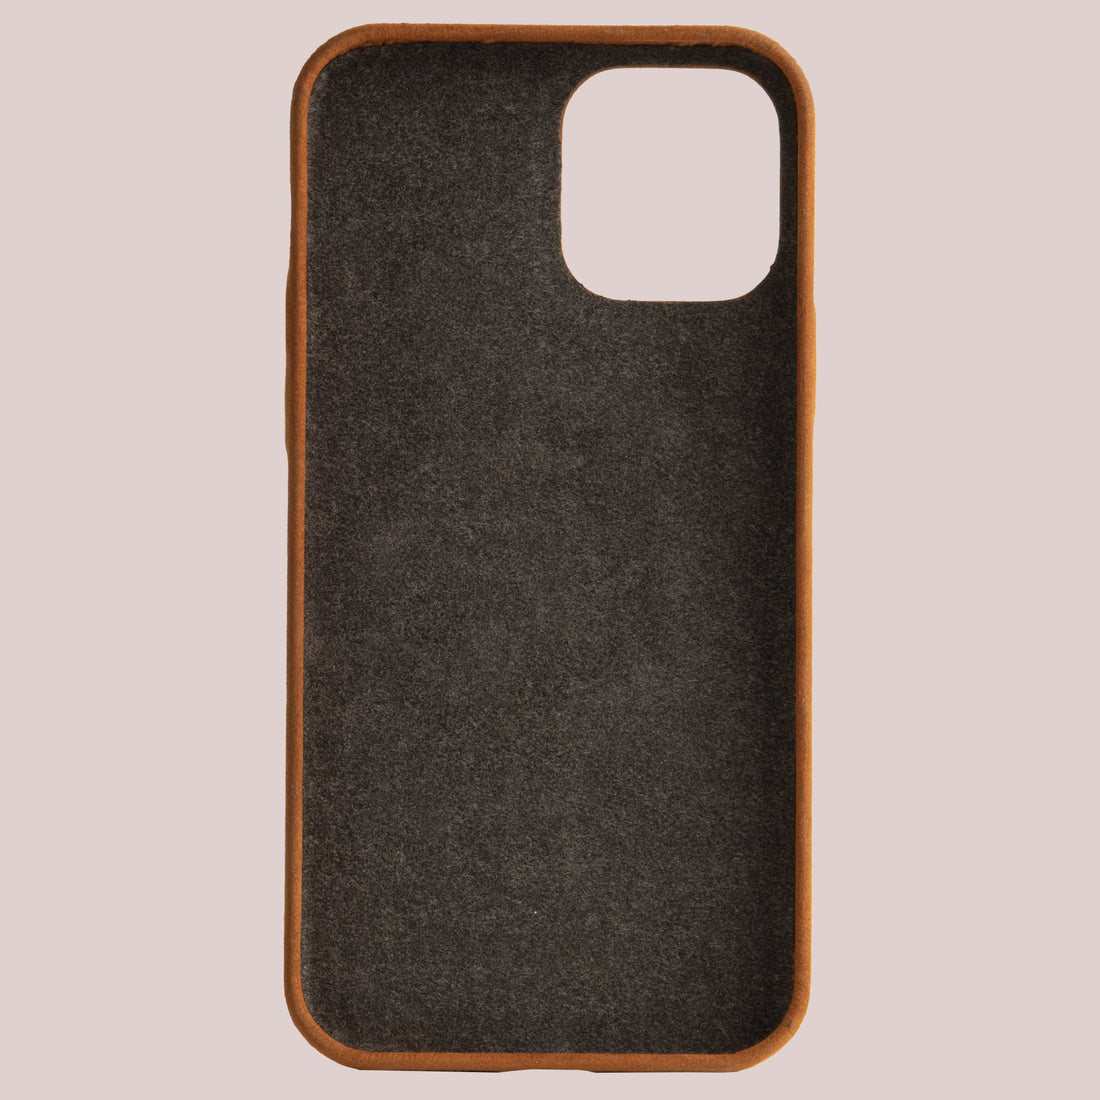 Kalon Case for iPhone 14 series with MagSafe Compatibility - Dark Soil